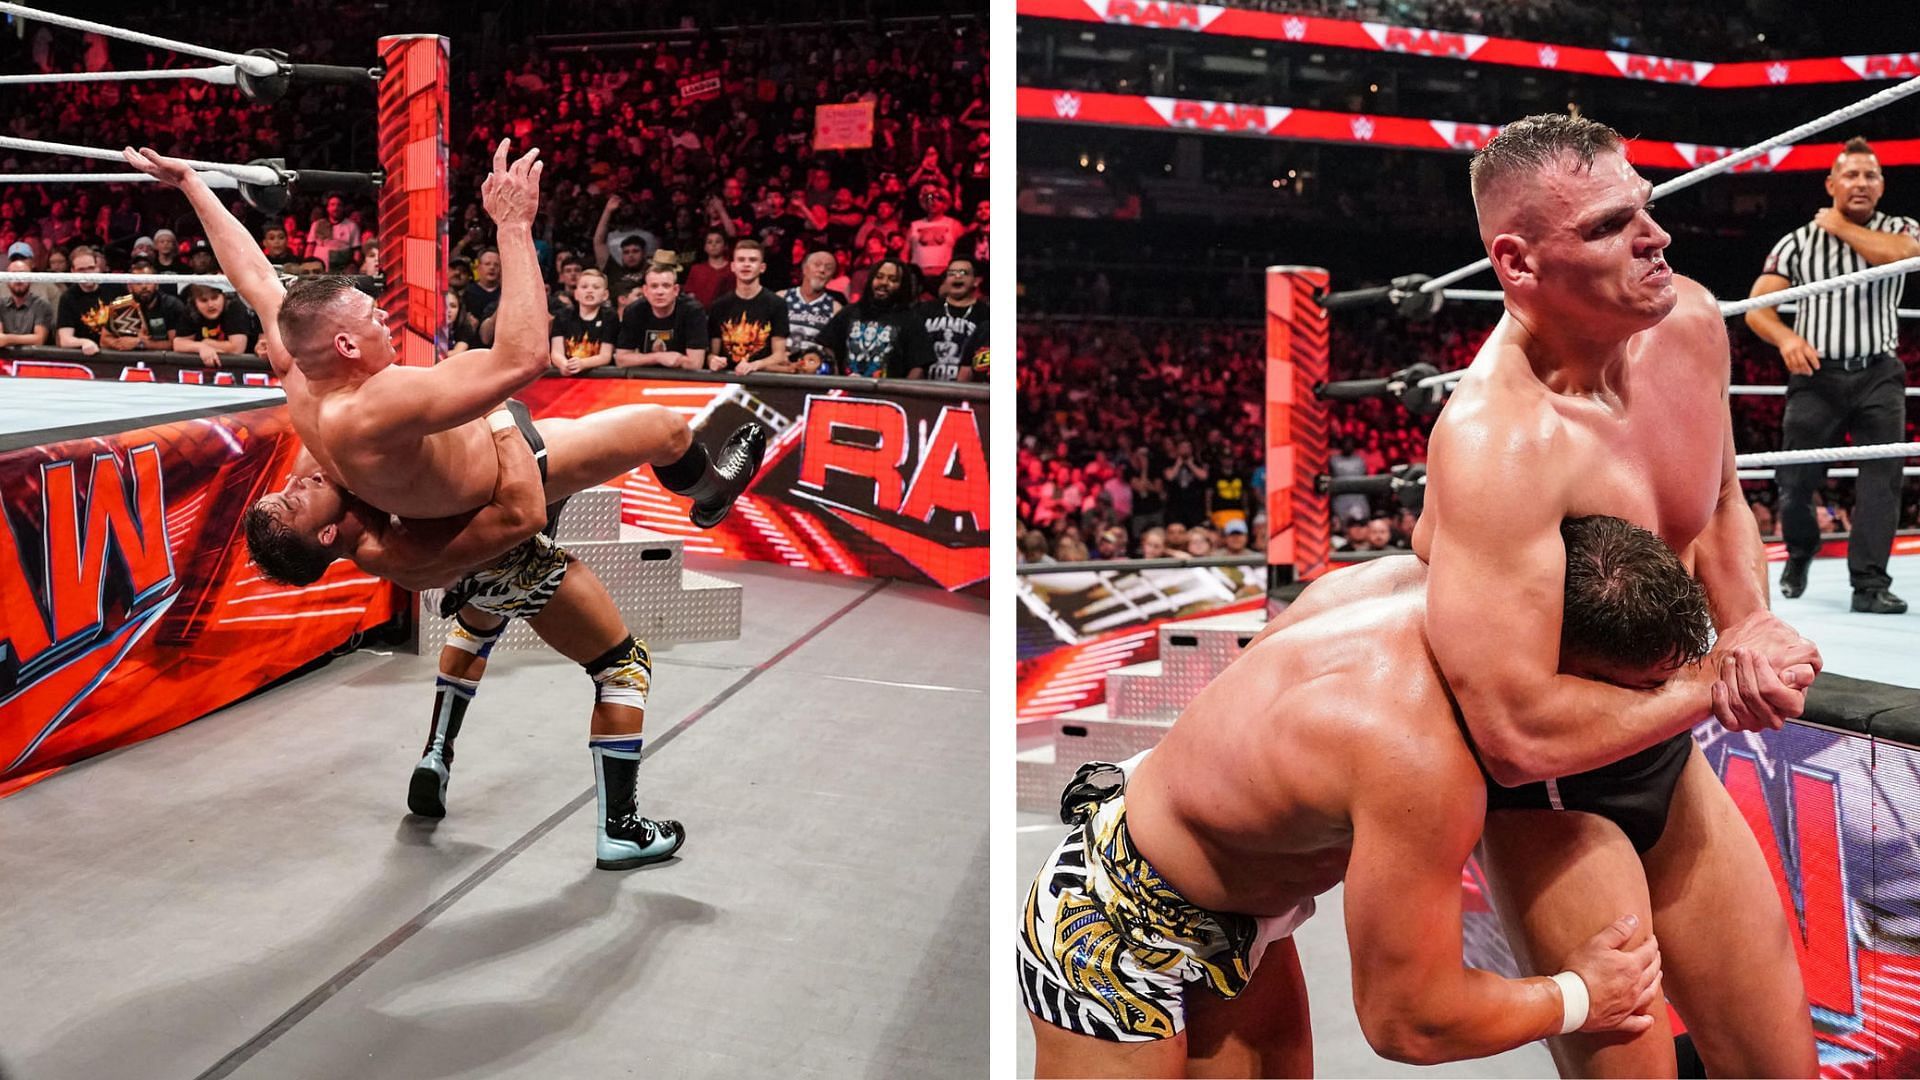 Scenes of Gable vs. Gunther of RAW